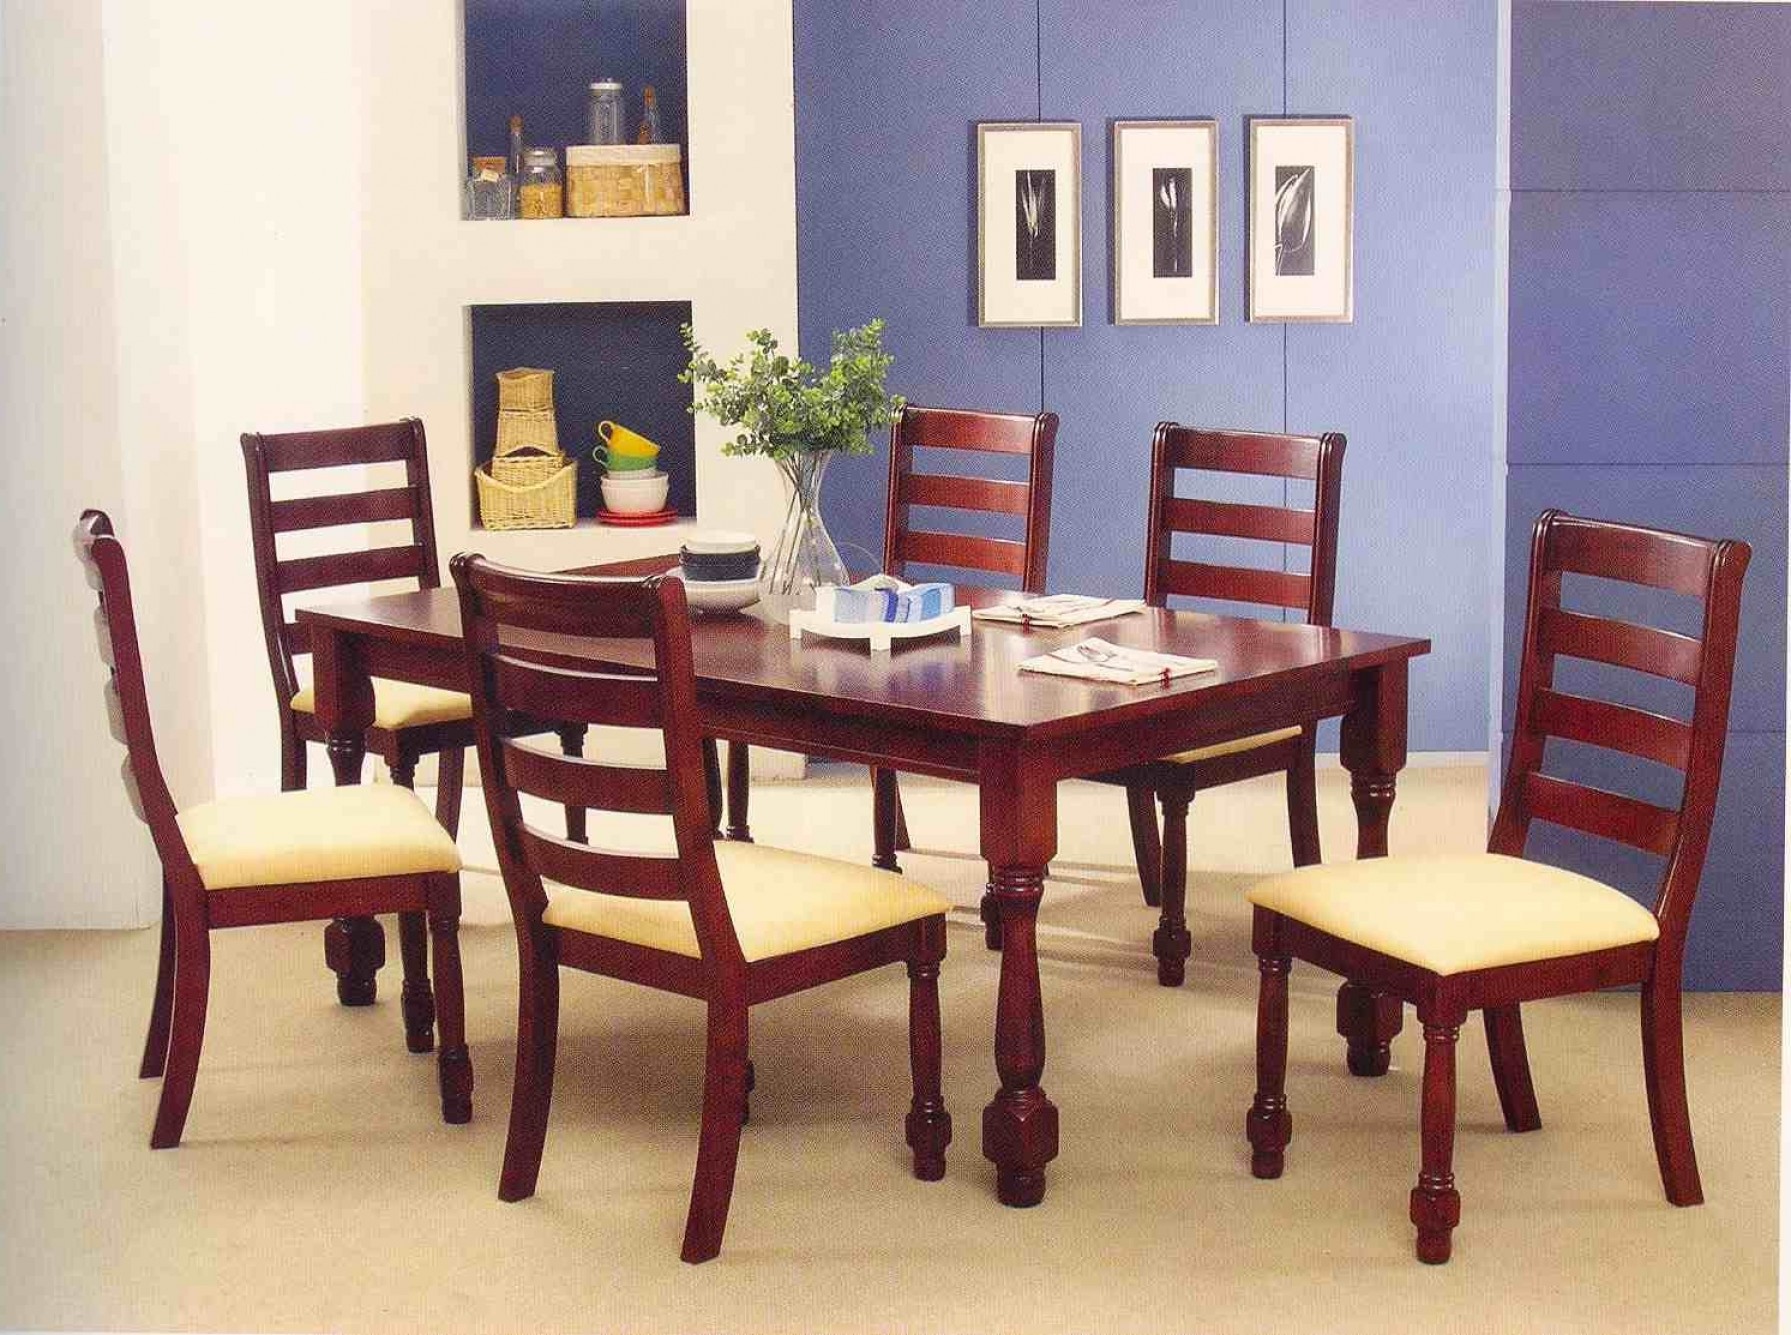 Dining Room With 6 Chairs Clip Art